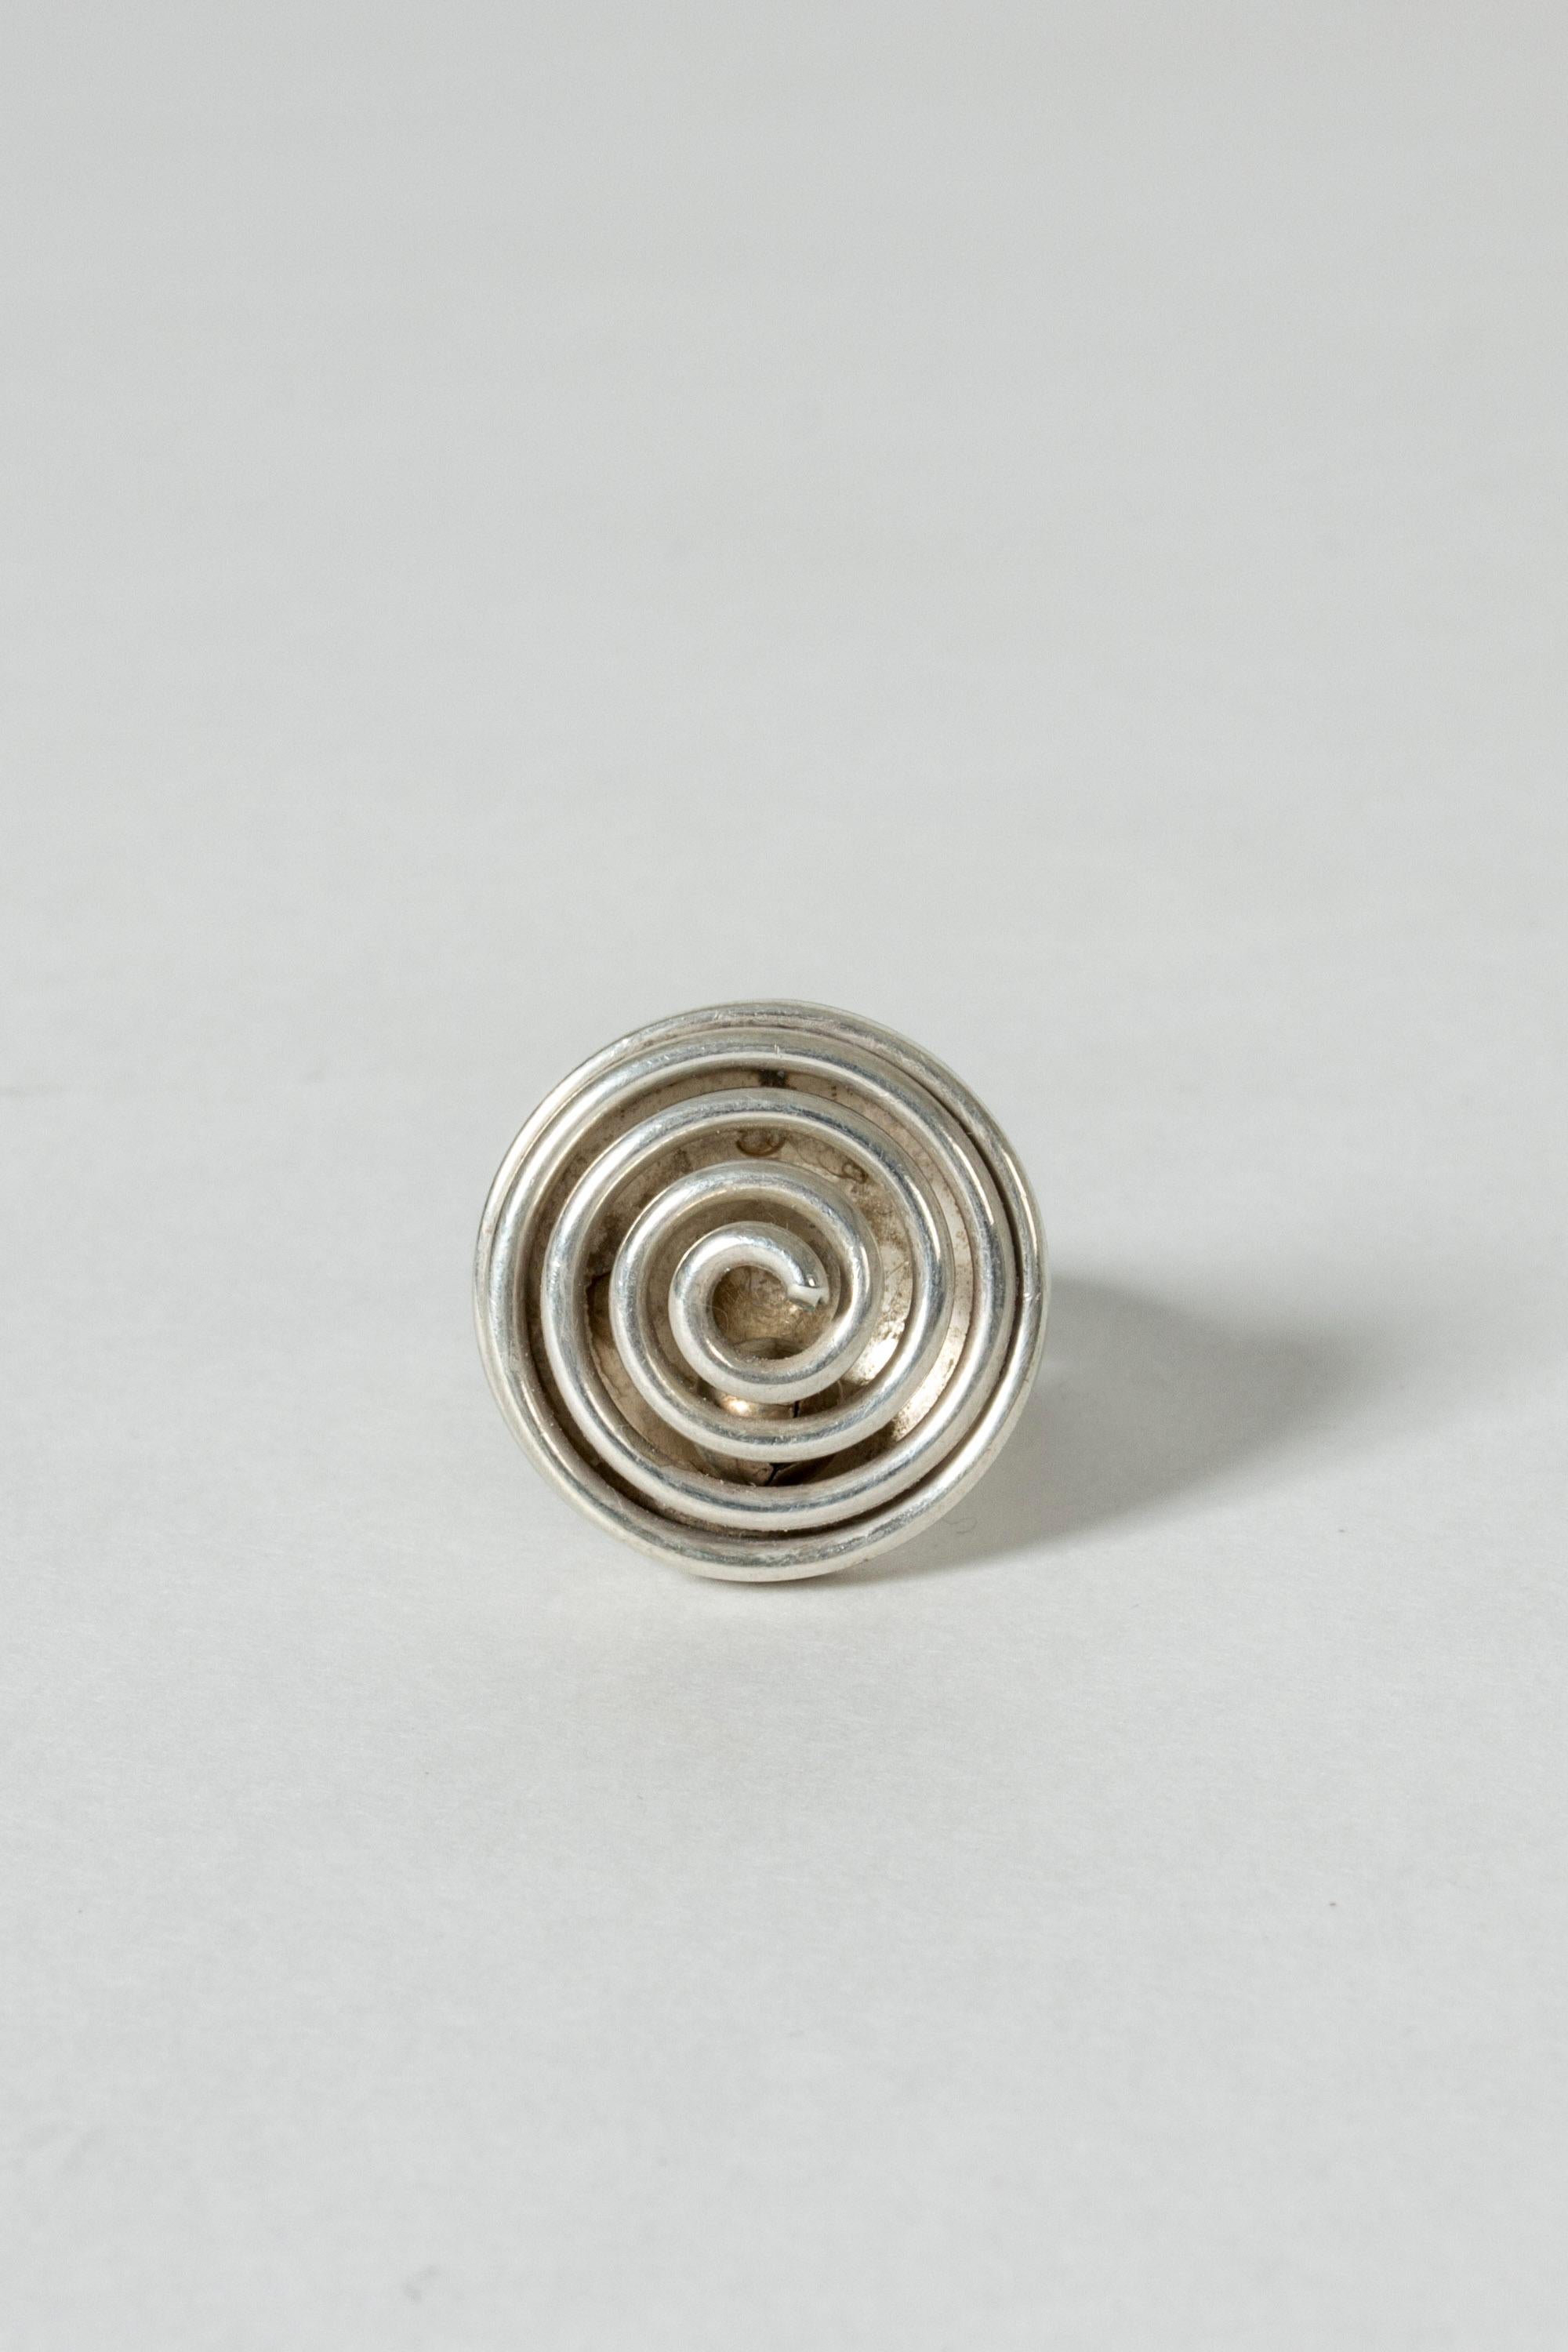 Fun silver ring from Kaplans with a large, spring spiral application. A small ball is caught inside and makes a discreet noise as is bounces around. Very nicely made.
